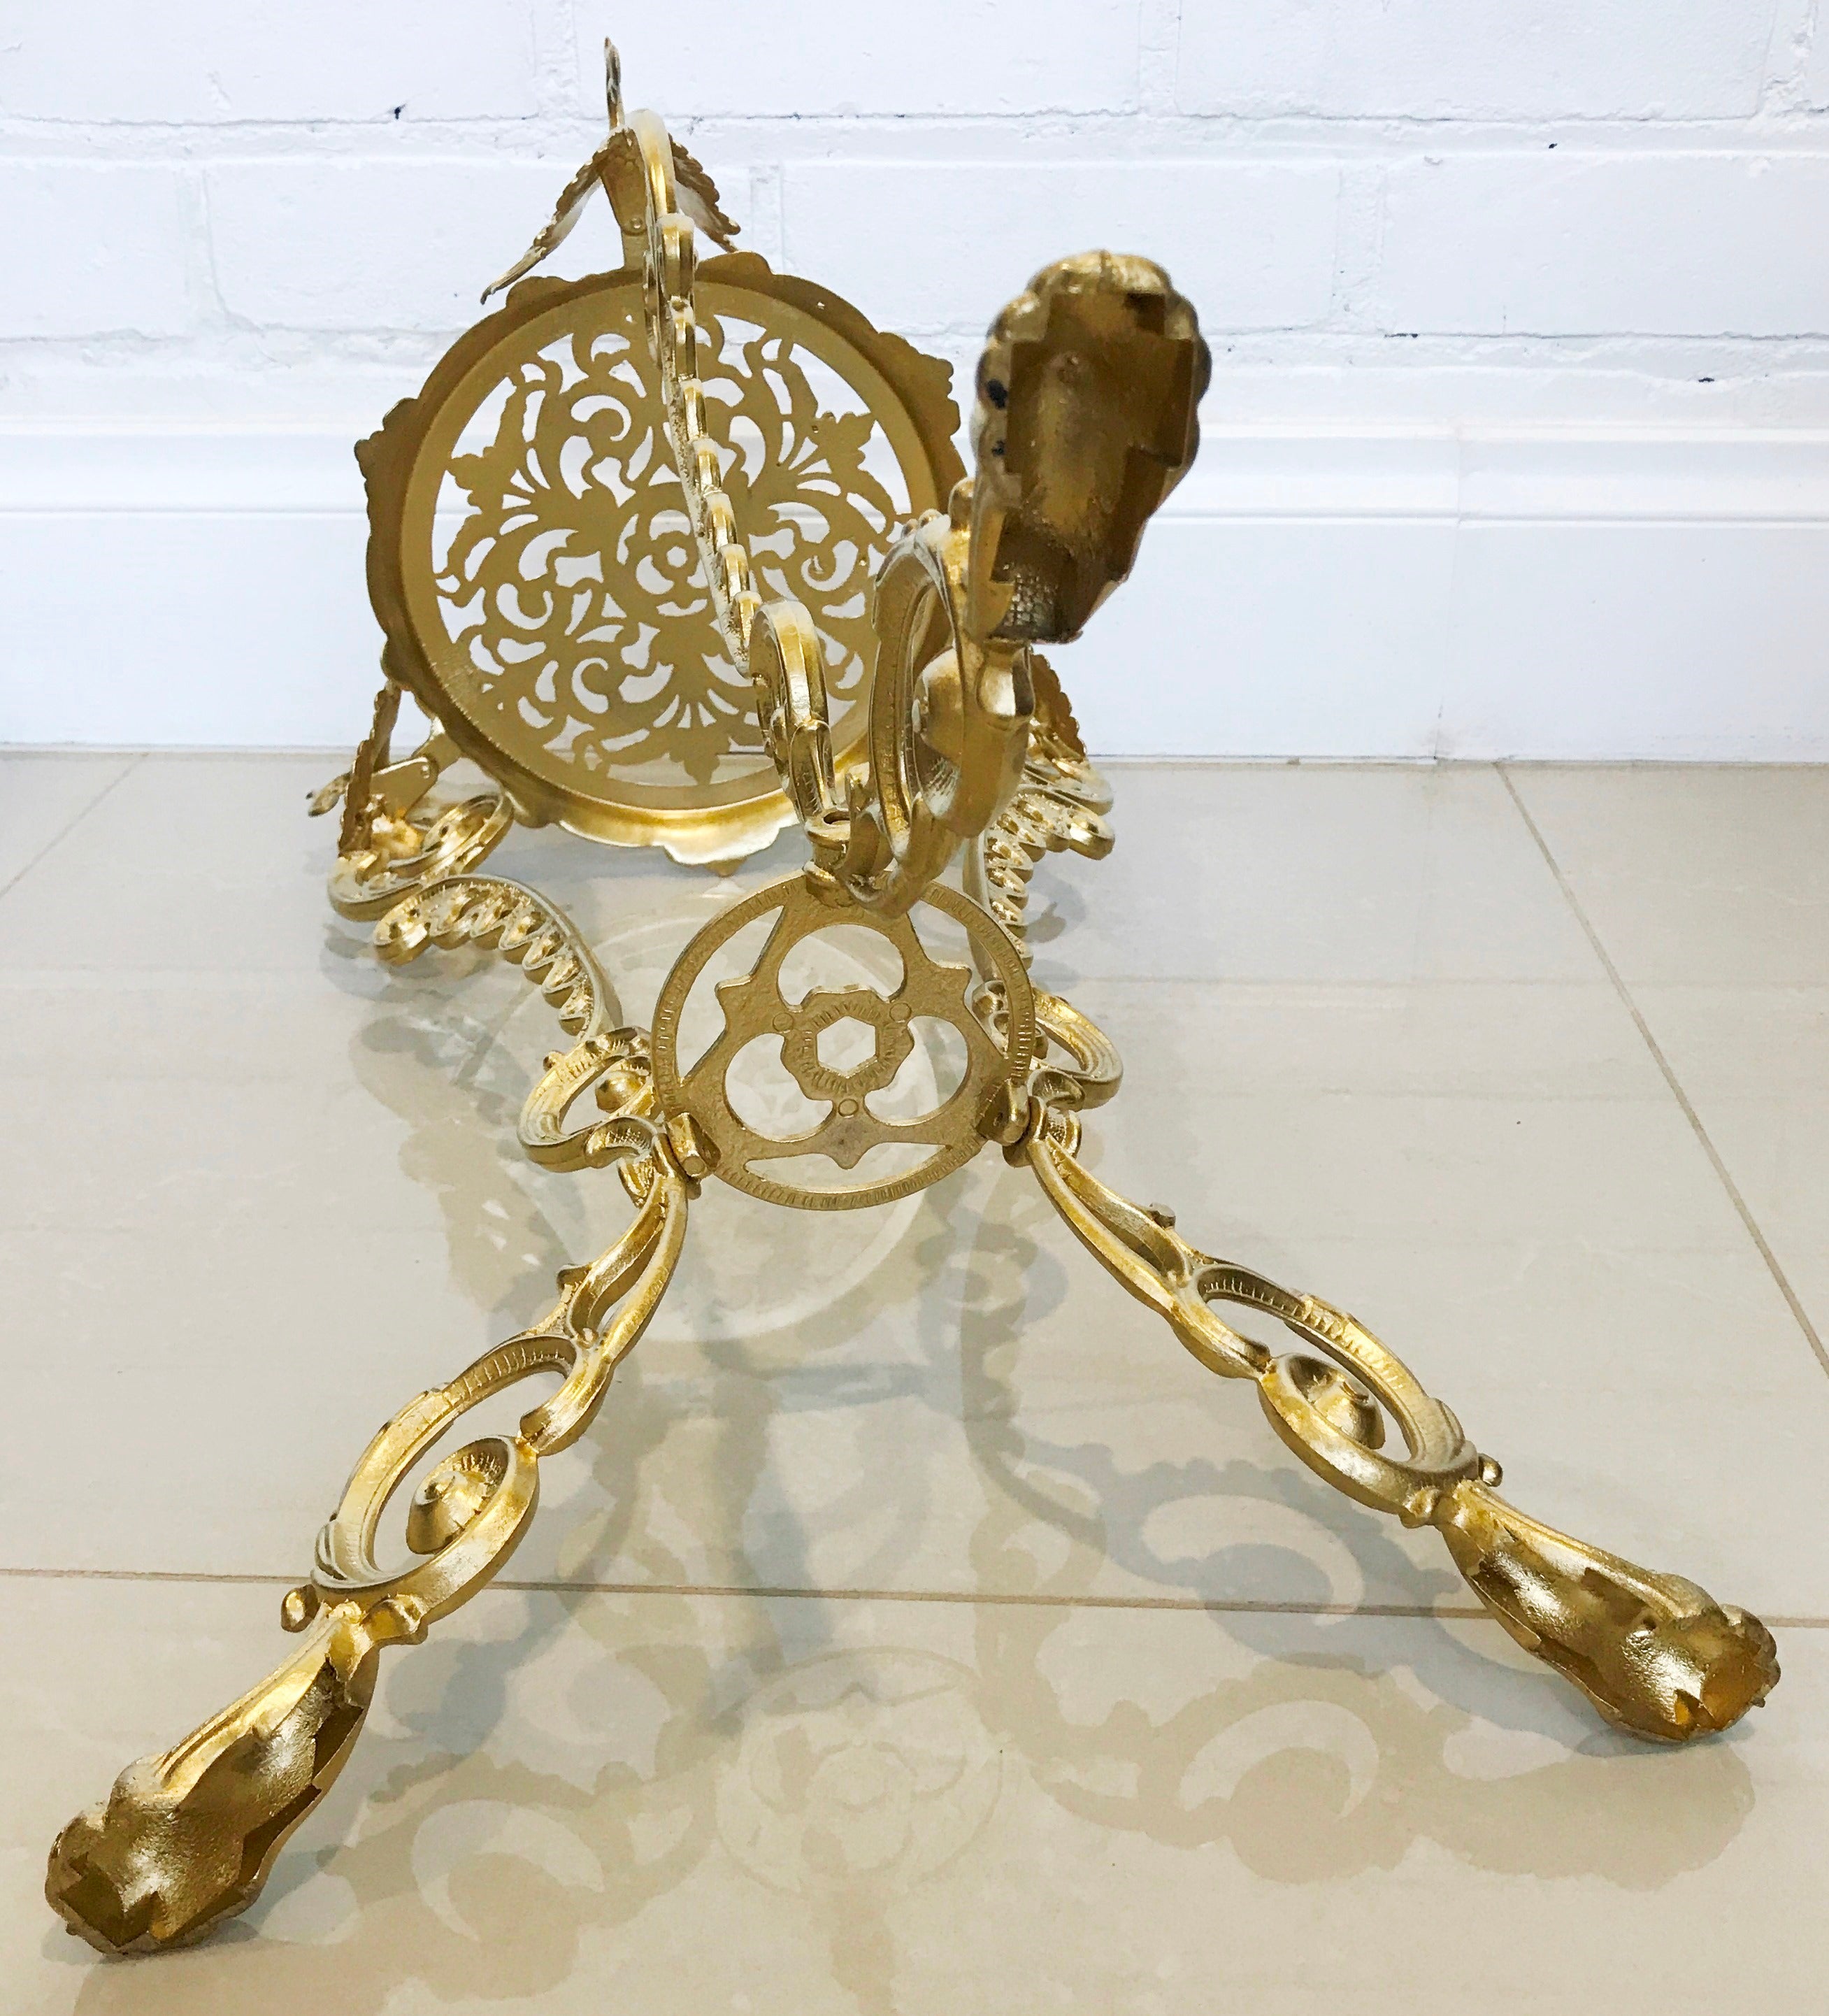 Antique Jardiniere Ornate Brass Plant Stand Table | eXibit collection